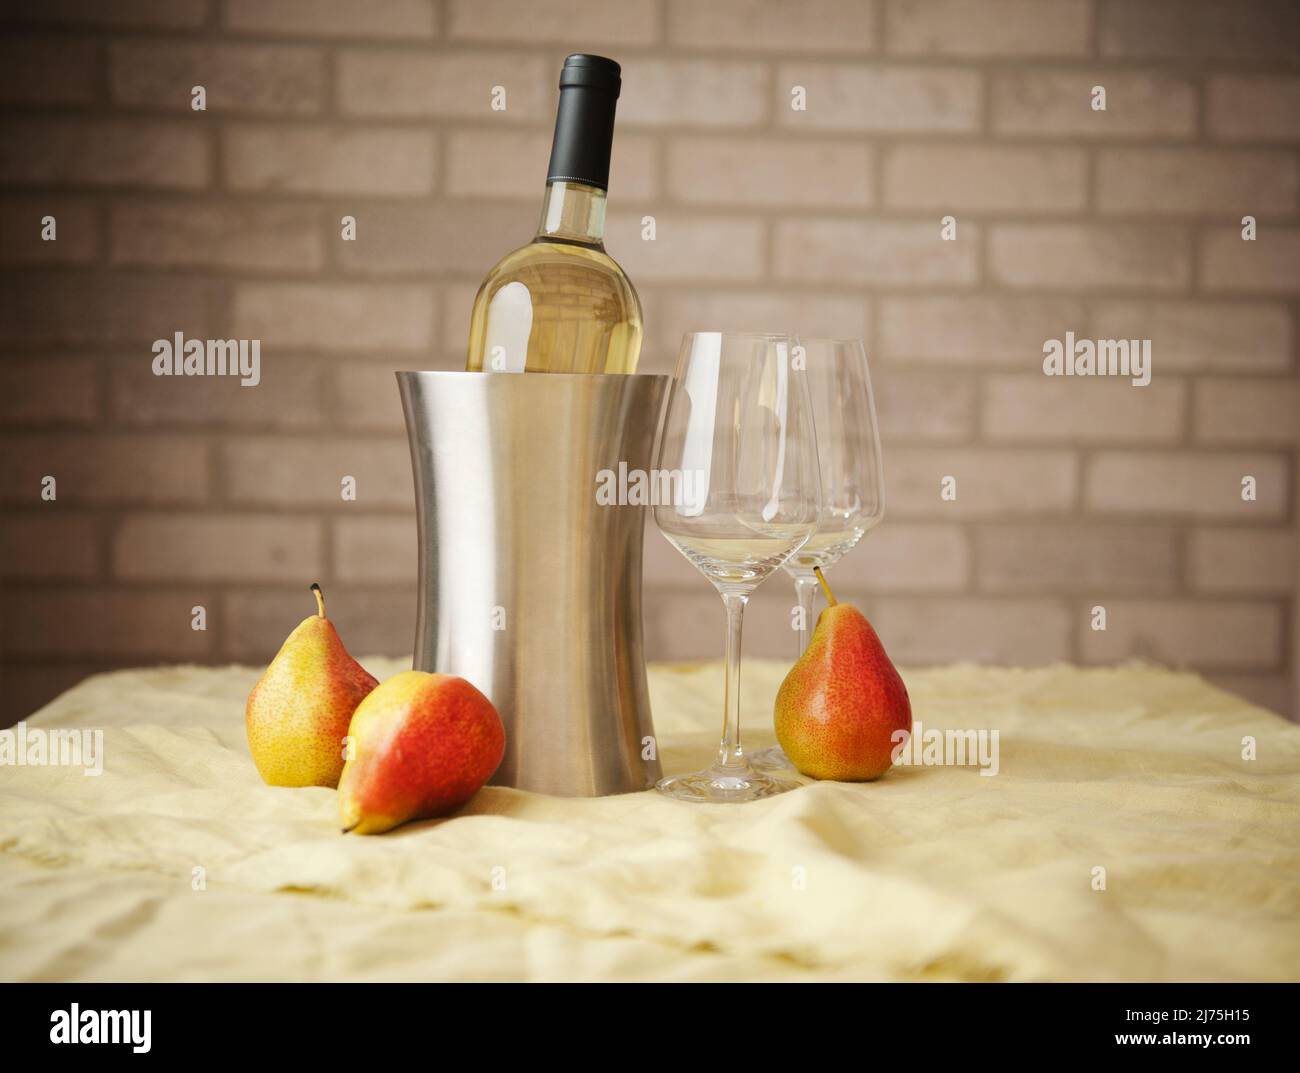 Bottle of white wine in wine cooler Stock Photo